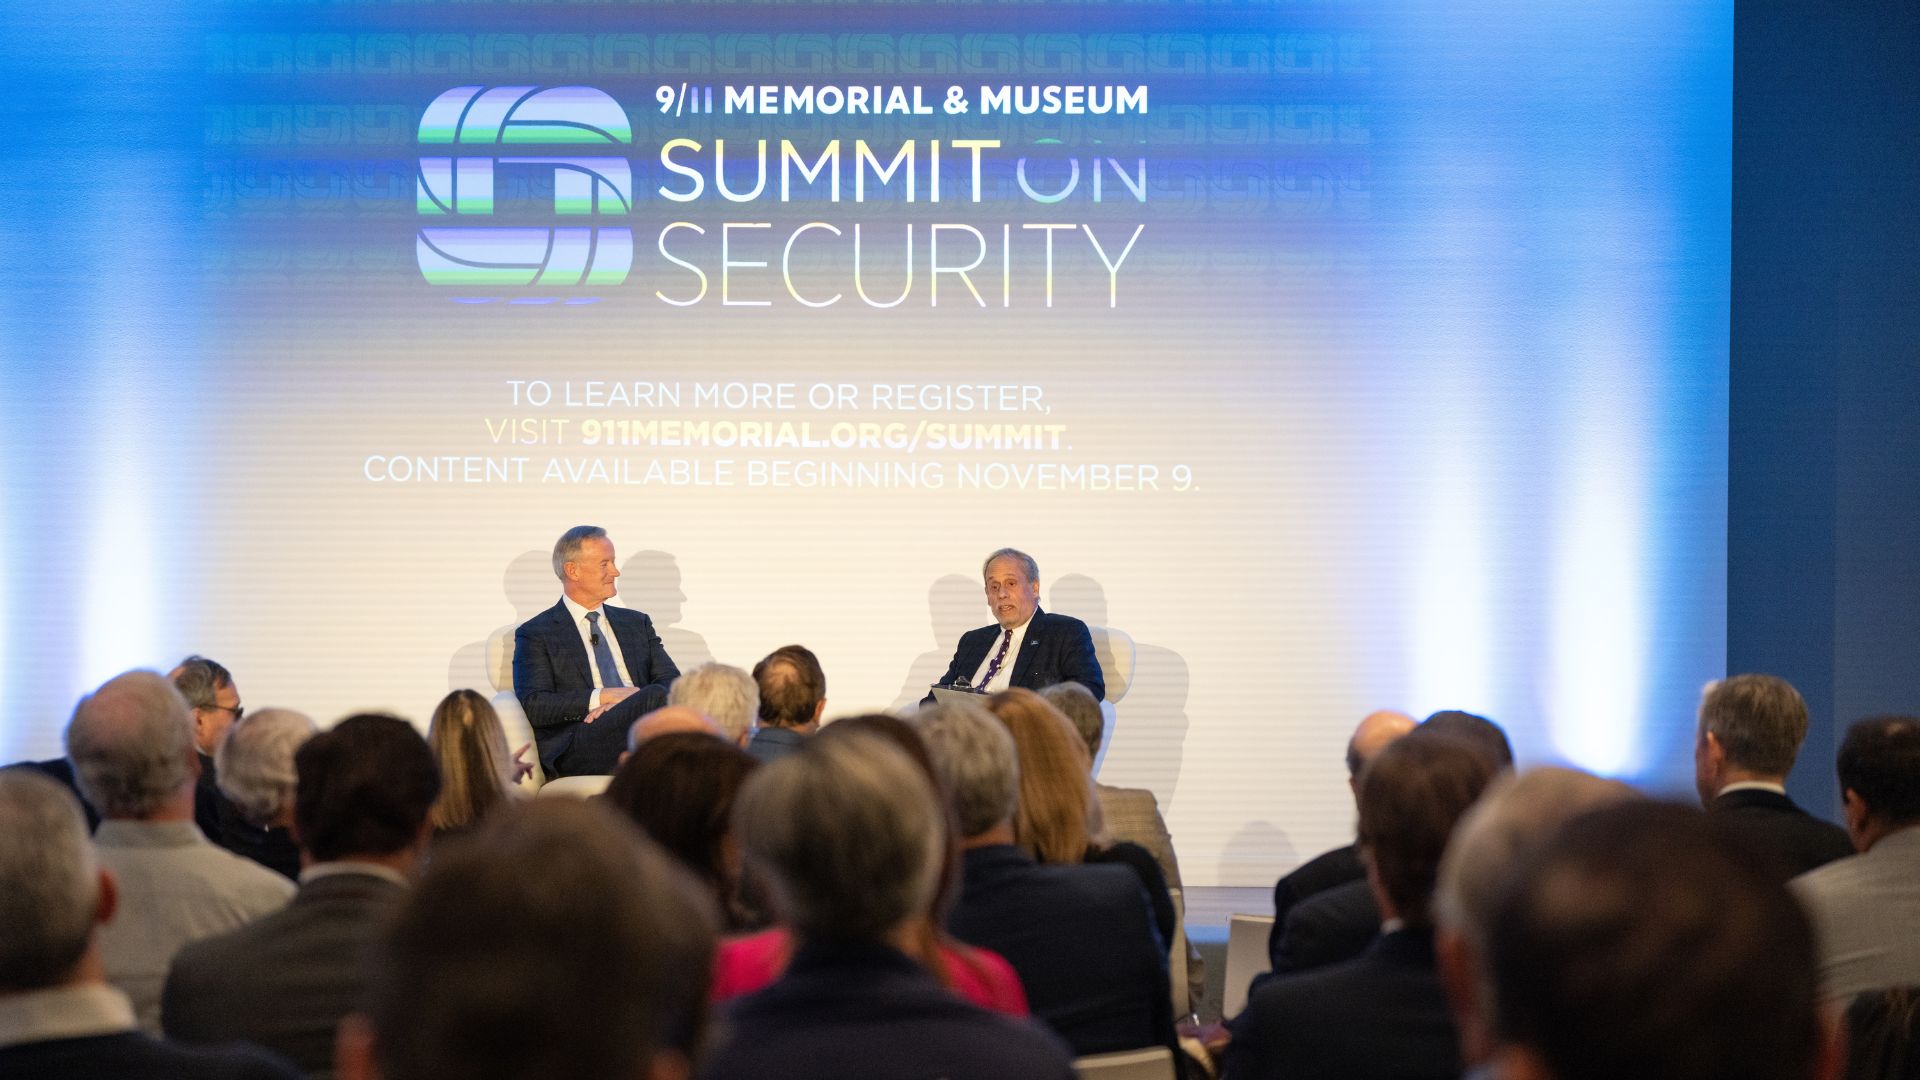 Back view of an audience listening to two speakers on stage, in front of a curtain with the 9/11 Memorial & Museum Summit on Security logo